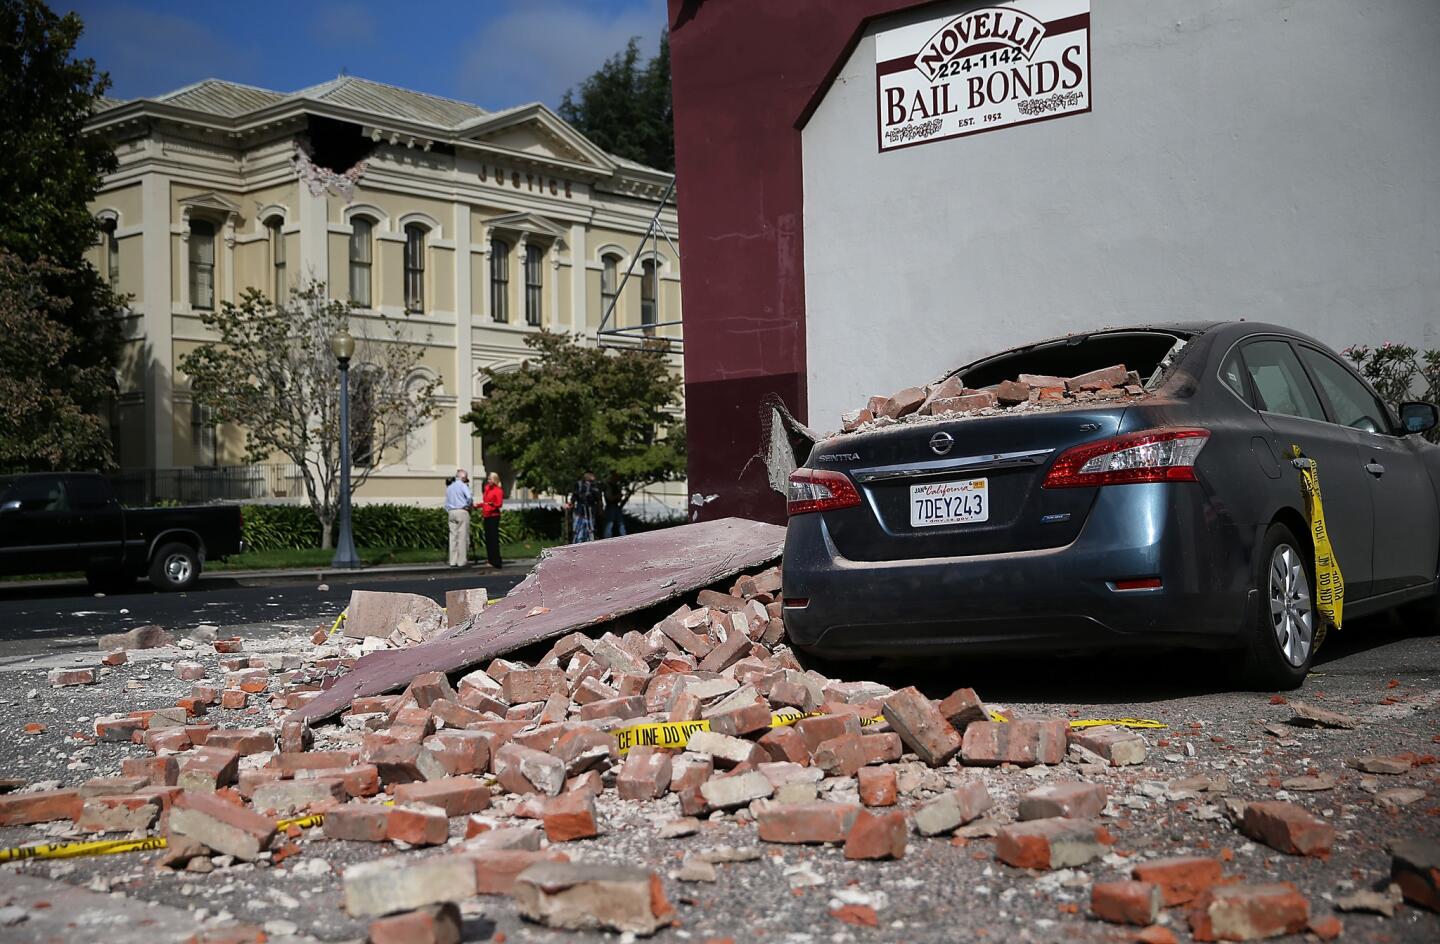 A car is seen covered in bricks following a reported 6.0 earthquake on August 24, 2014 in Napa, California.